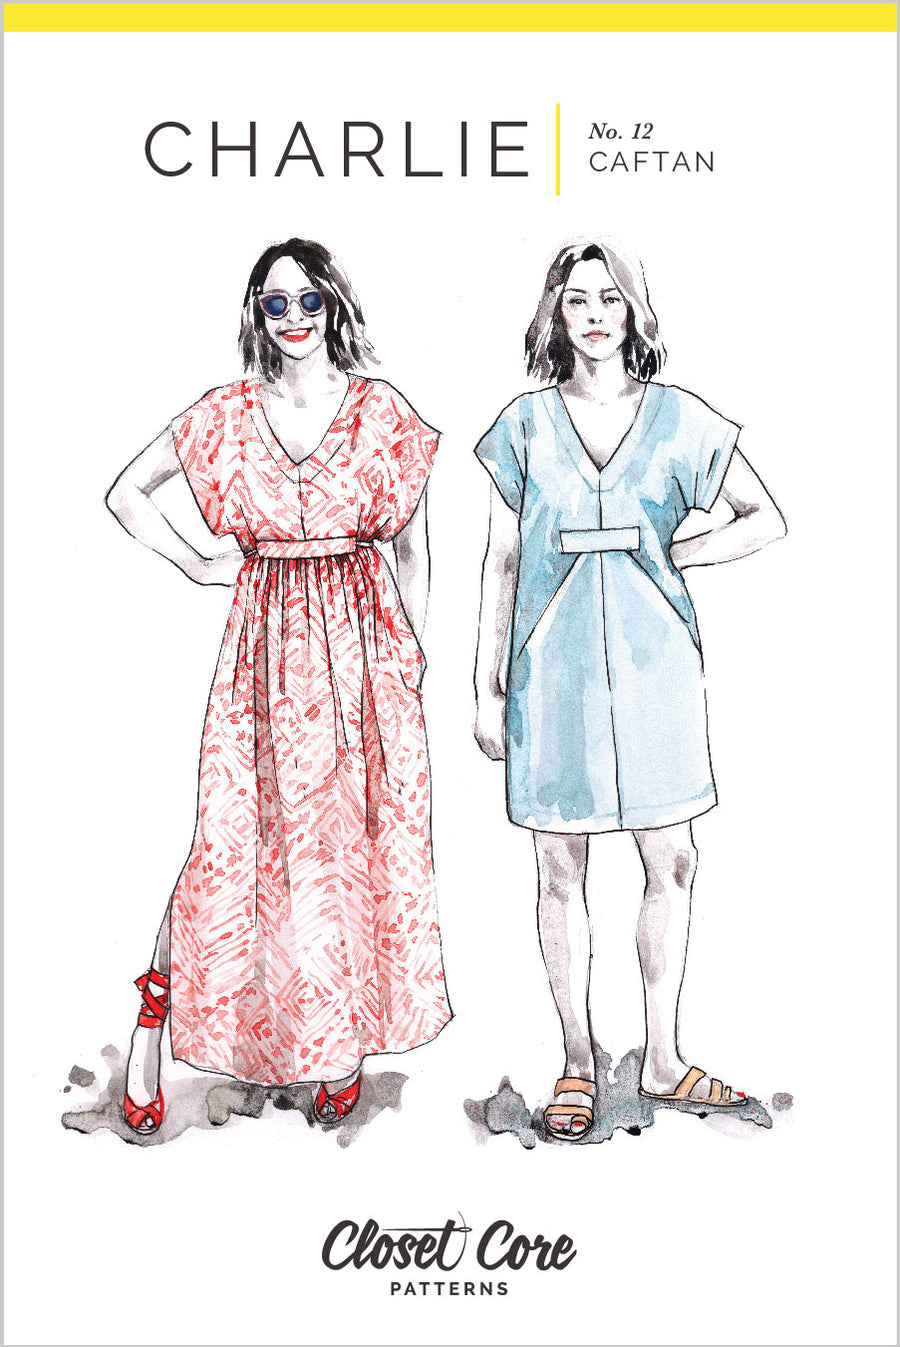 2023's Most Popular Sewing Patterns - The Fold Line